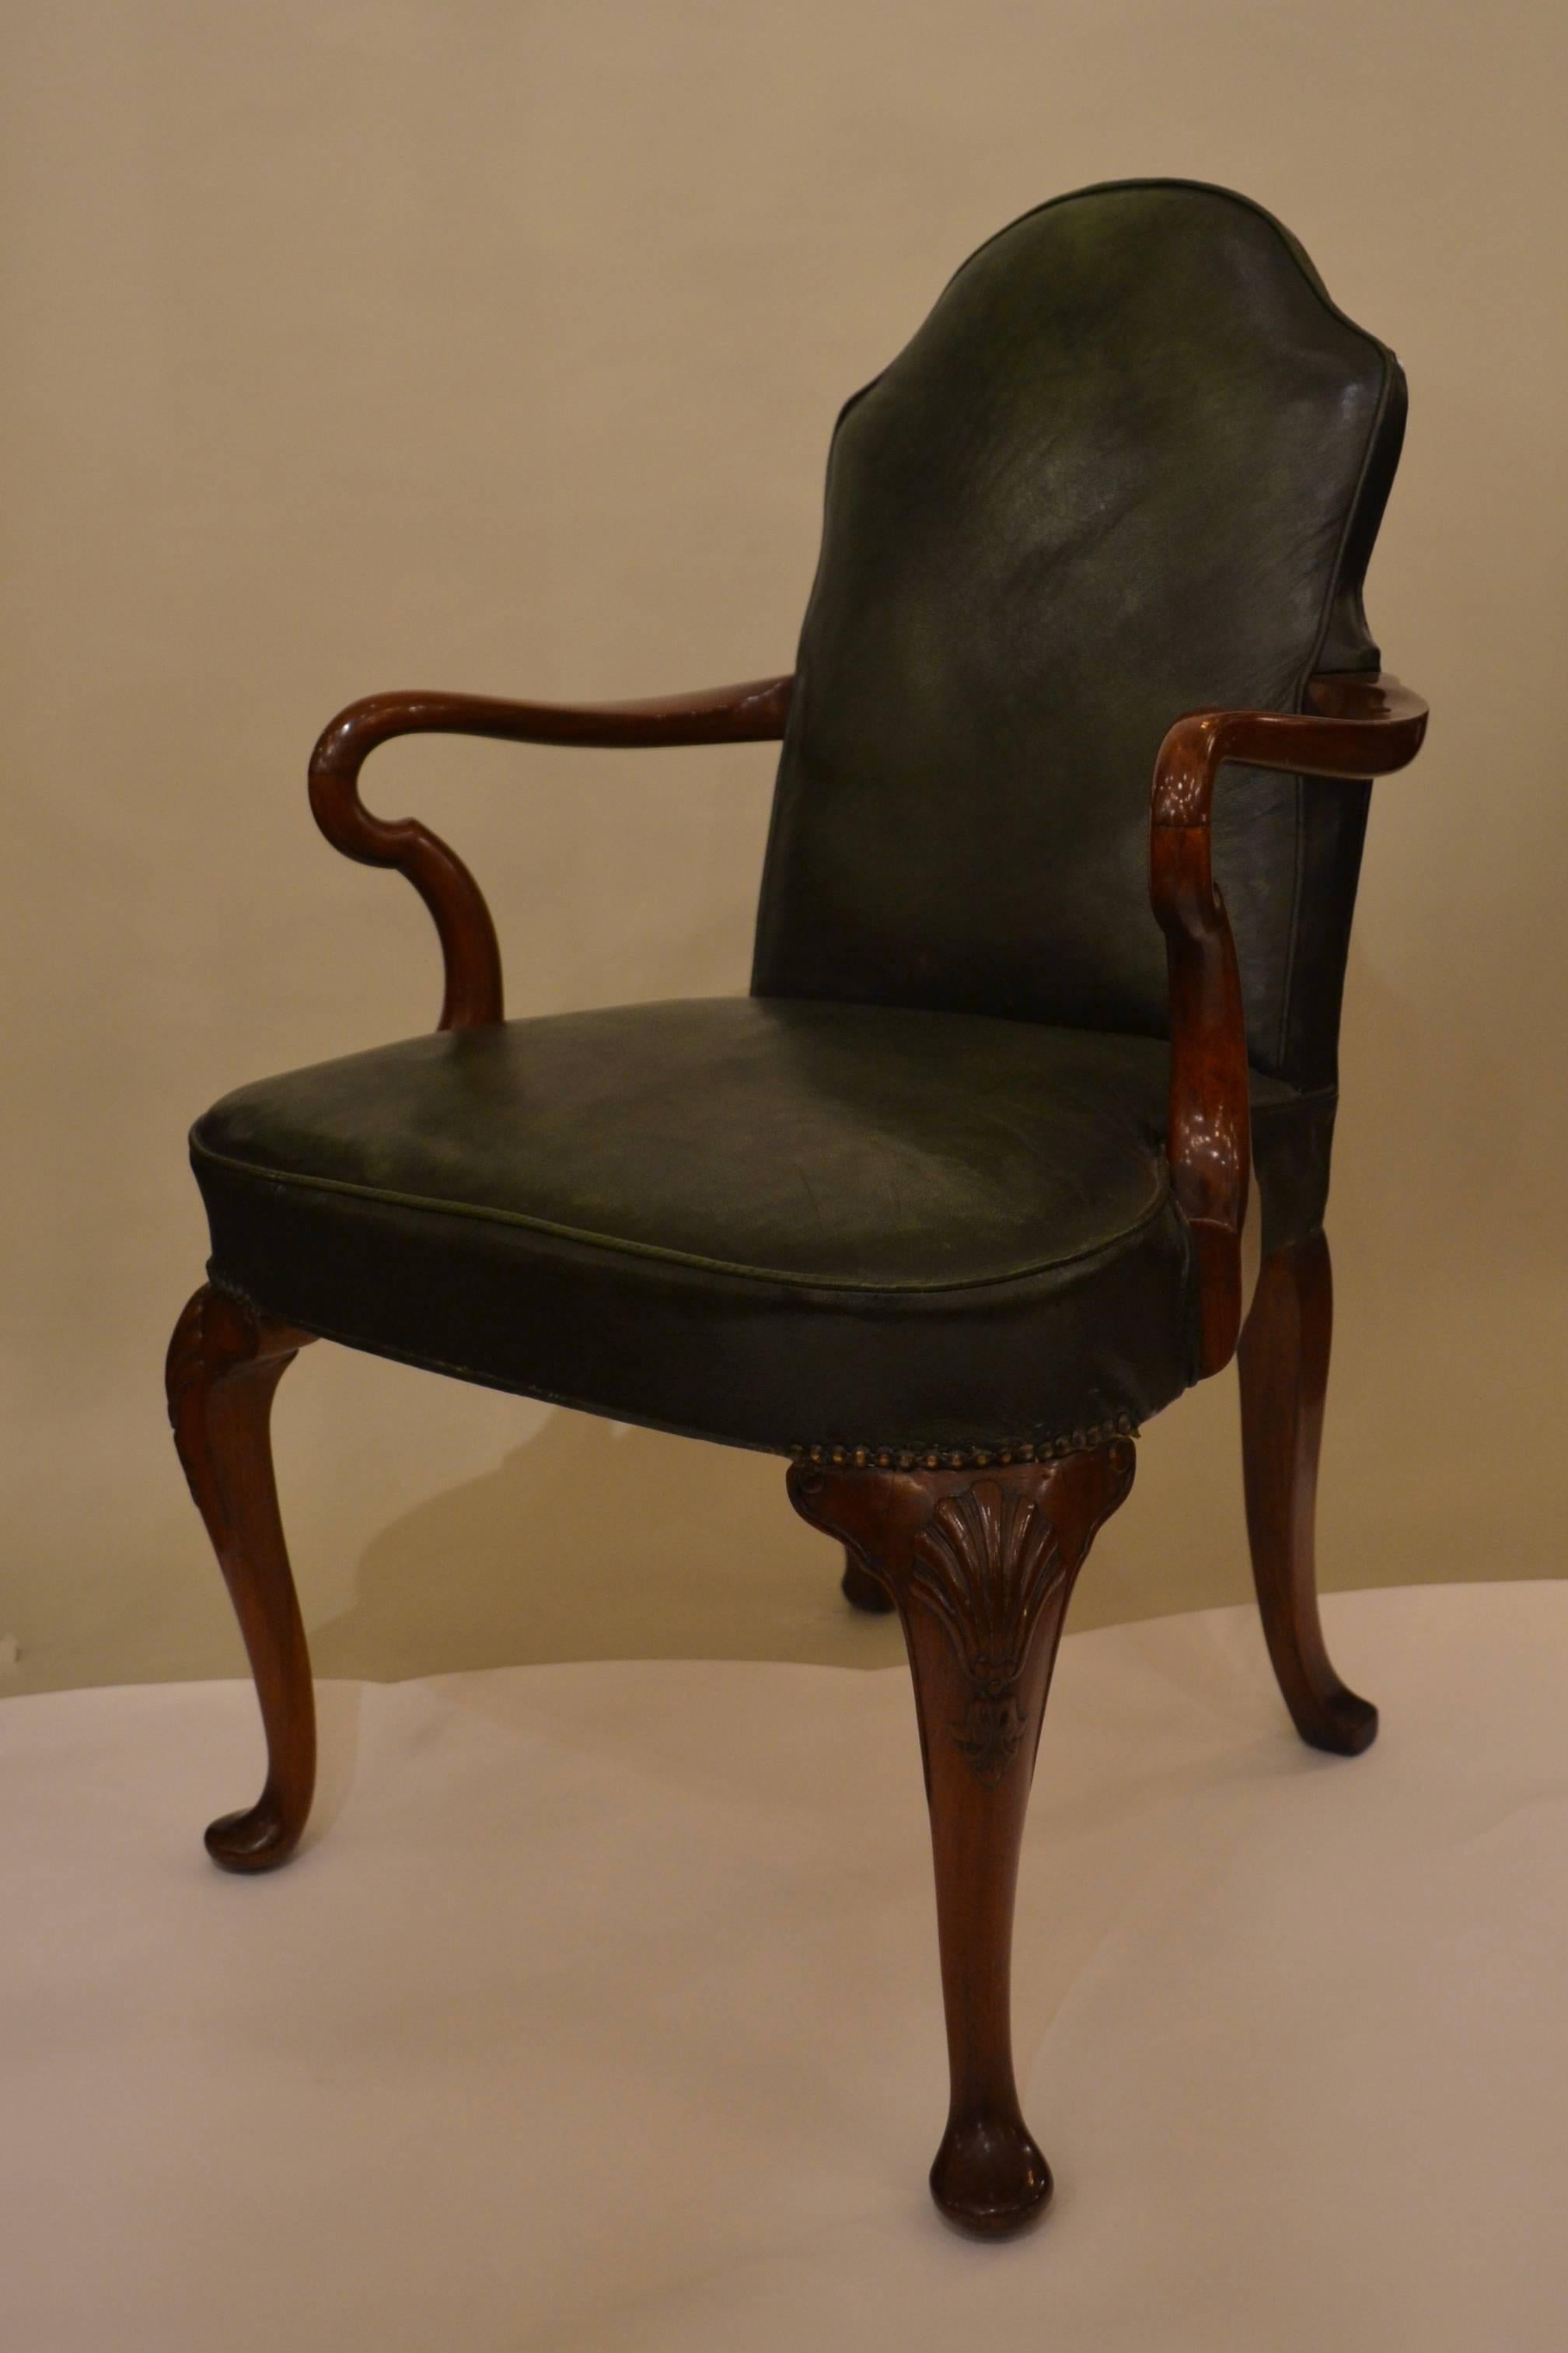 Pair of antique leather English armchairs, circa 1910-1920.